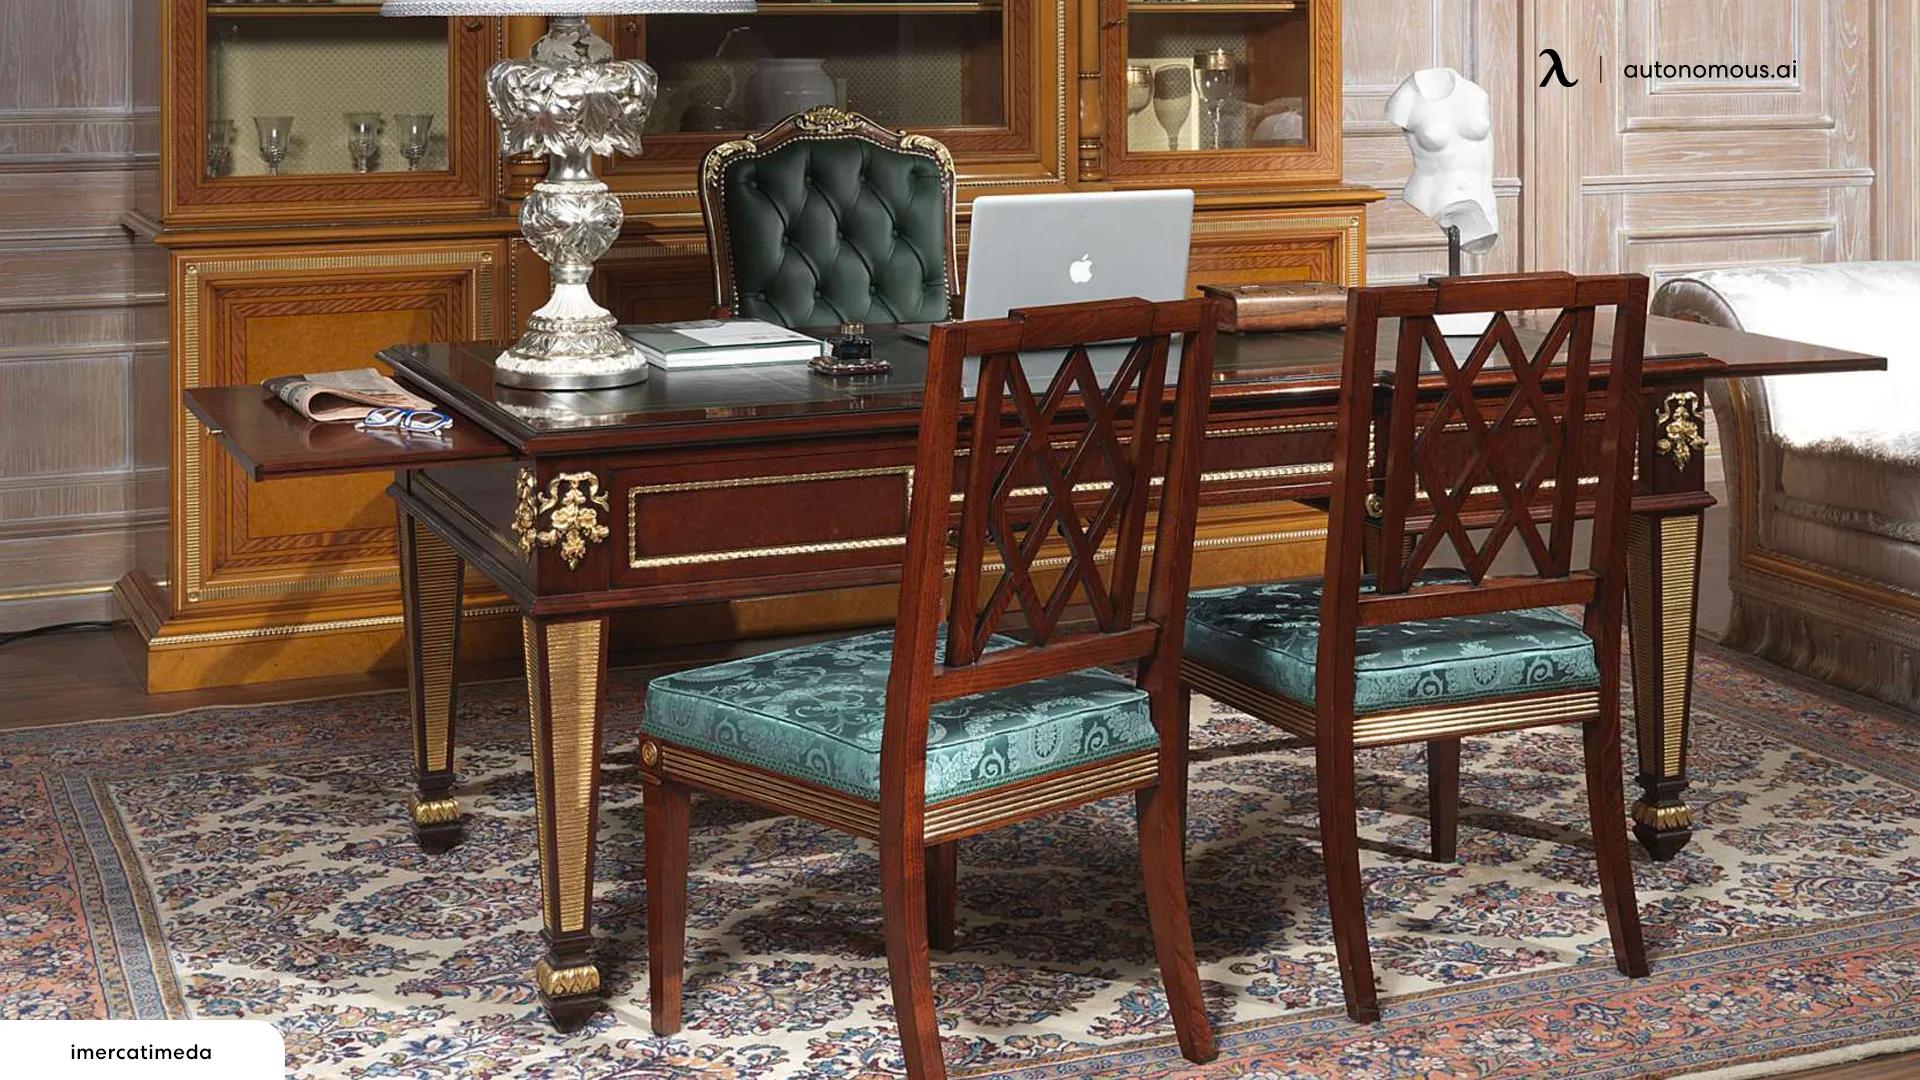 Invest in good furniture - classic home office design